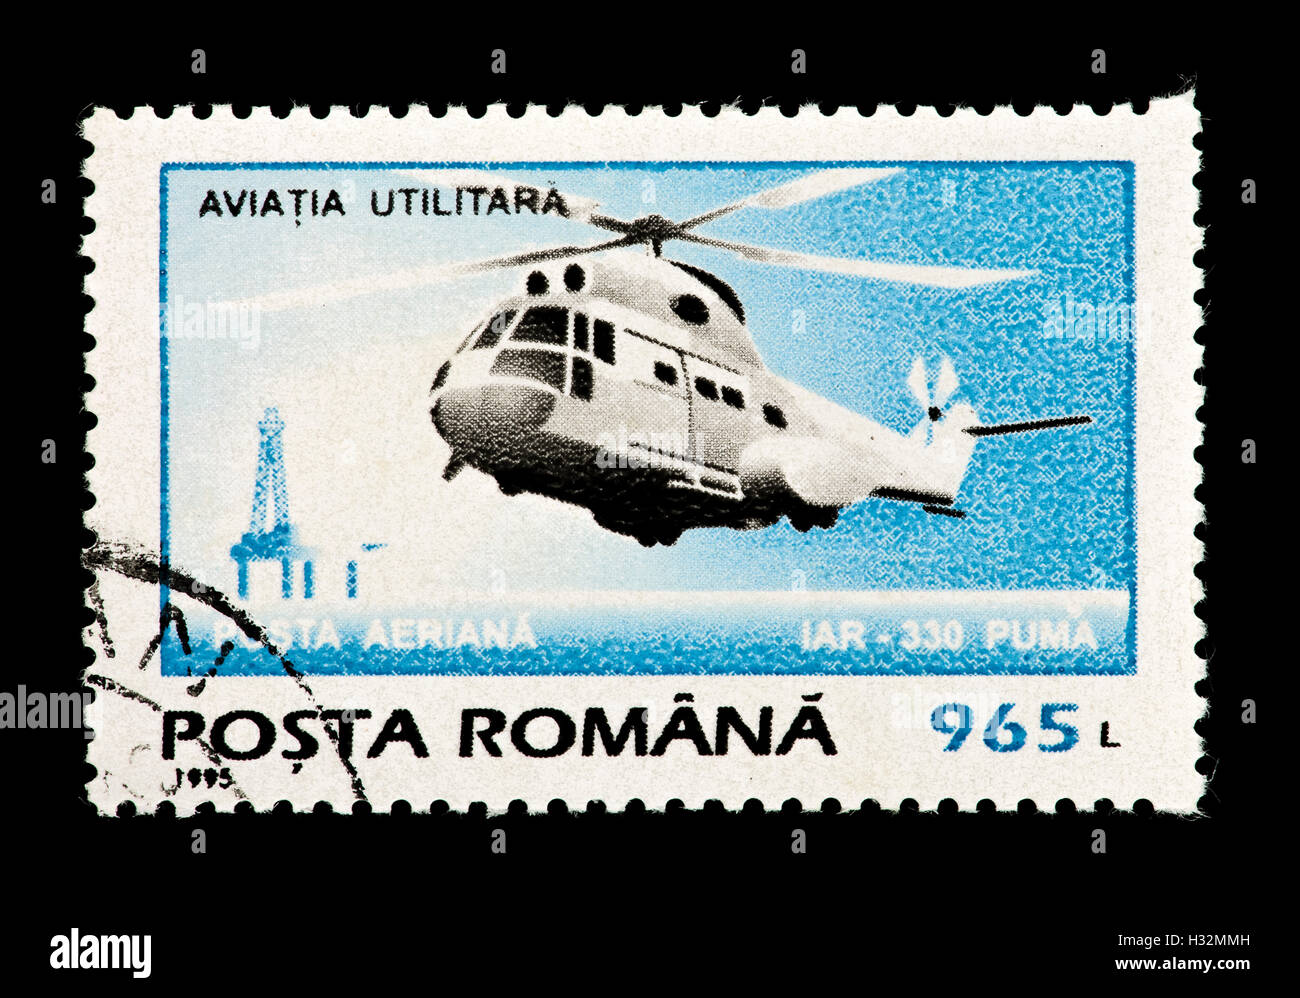 Postage stamp from Romania depicting a Sud Aviation SA 330 Puma helicopter. Stock Photo